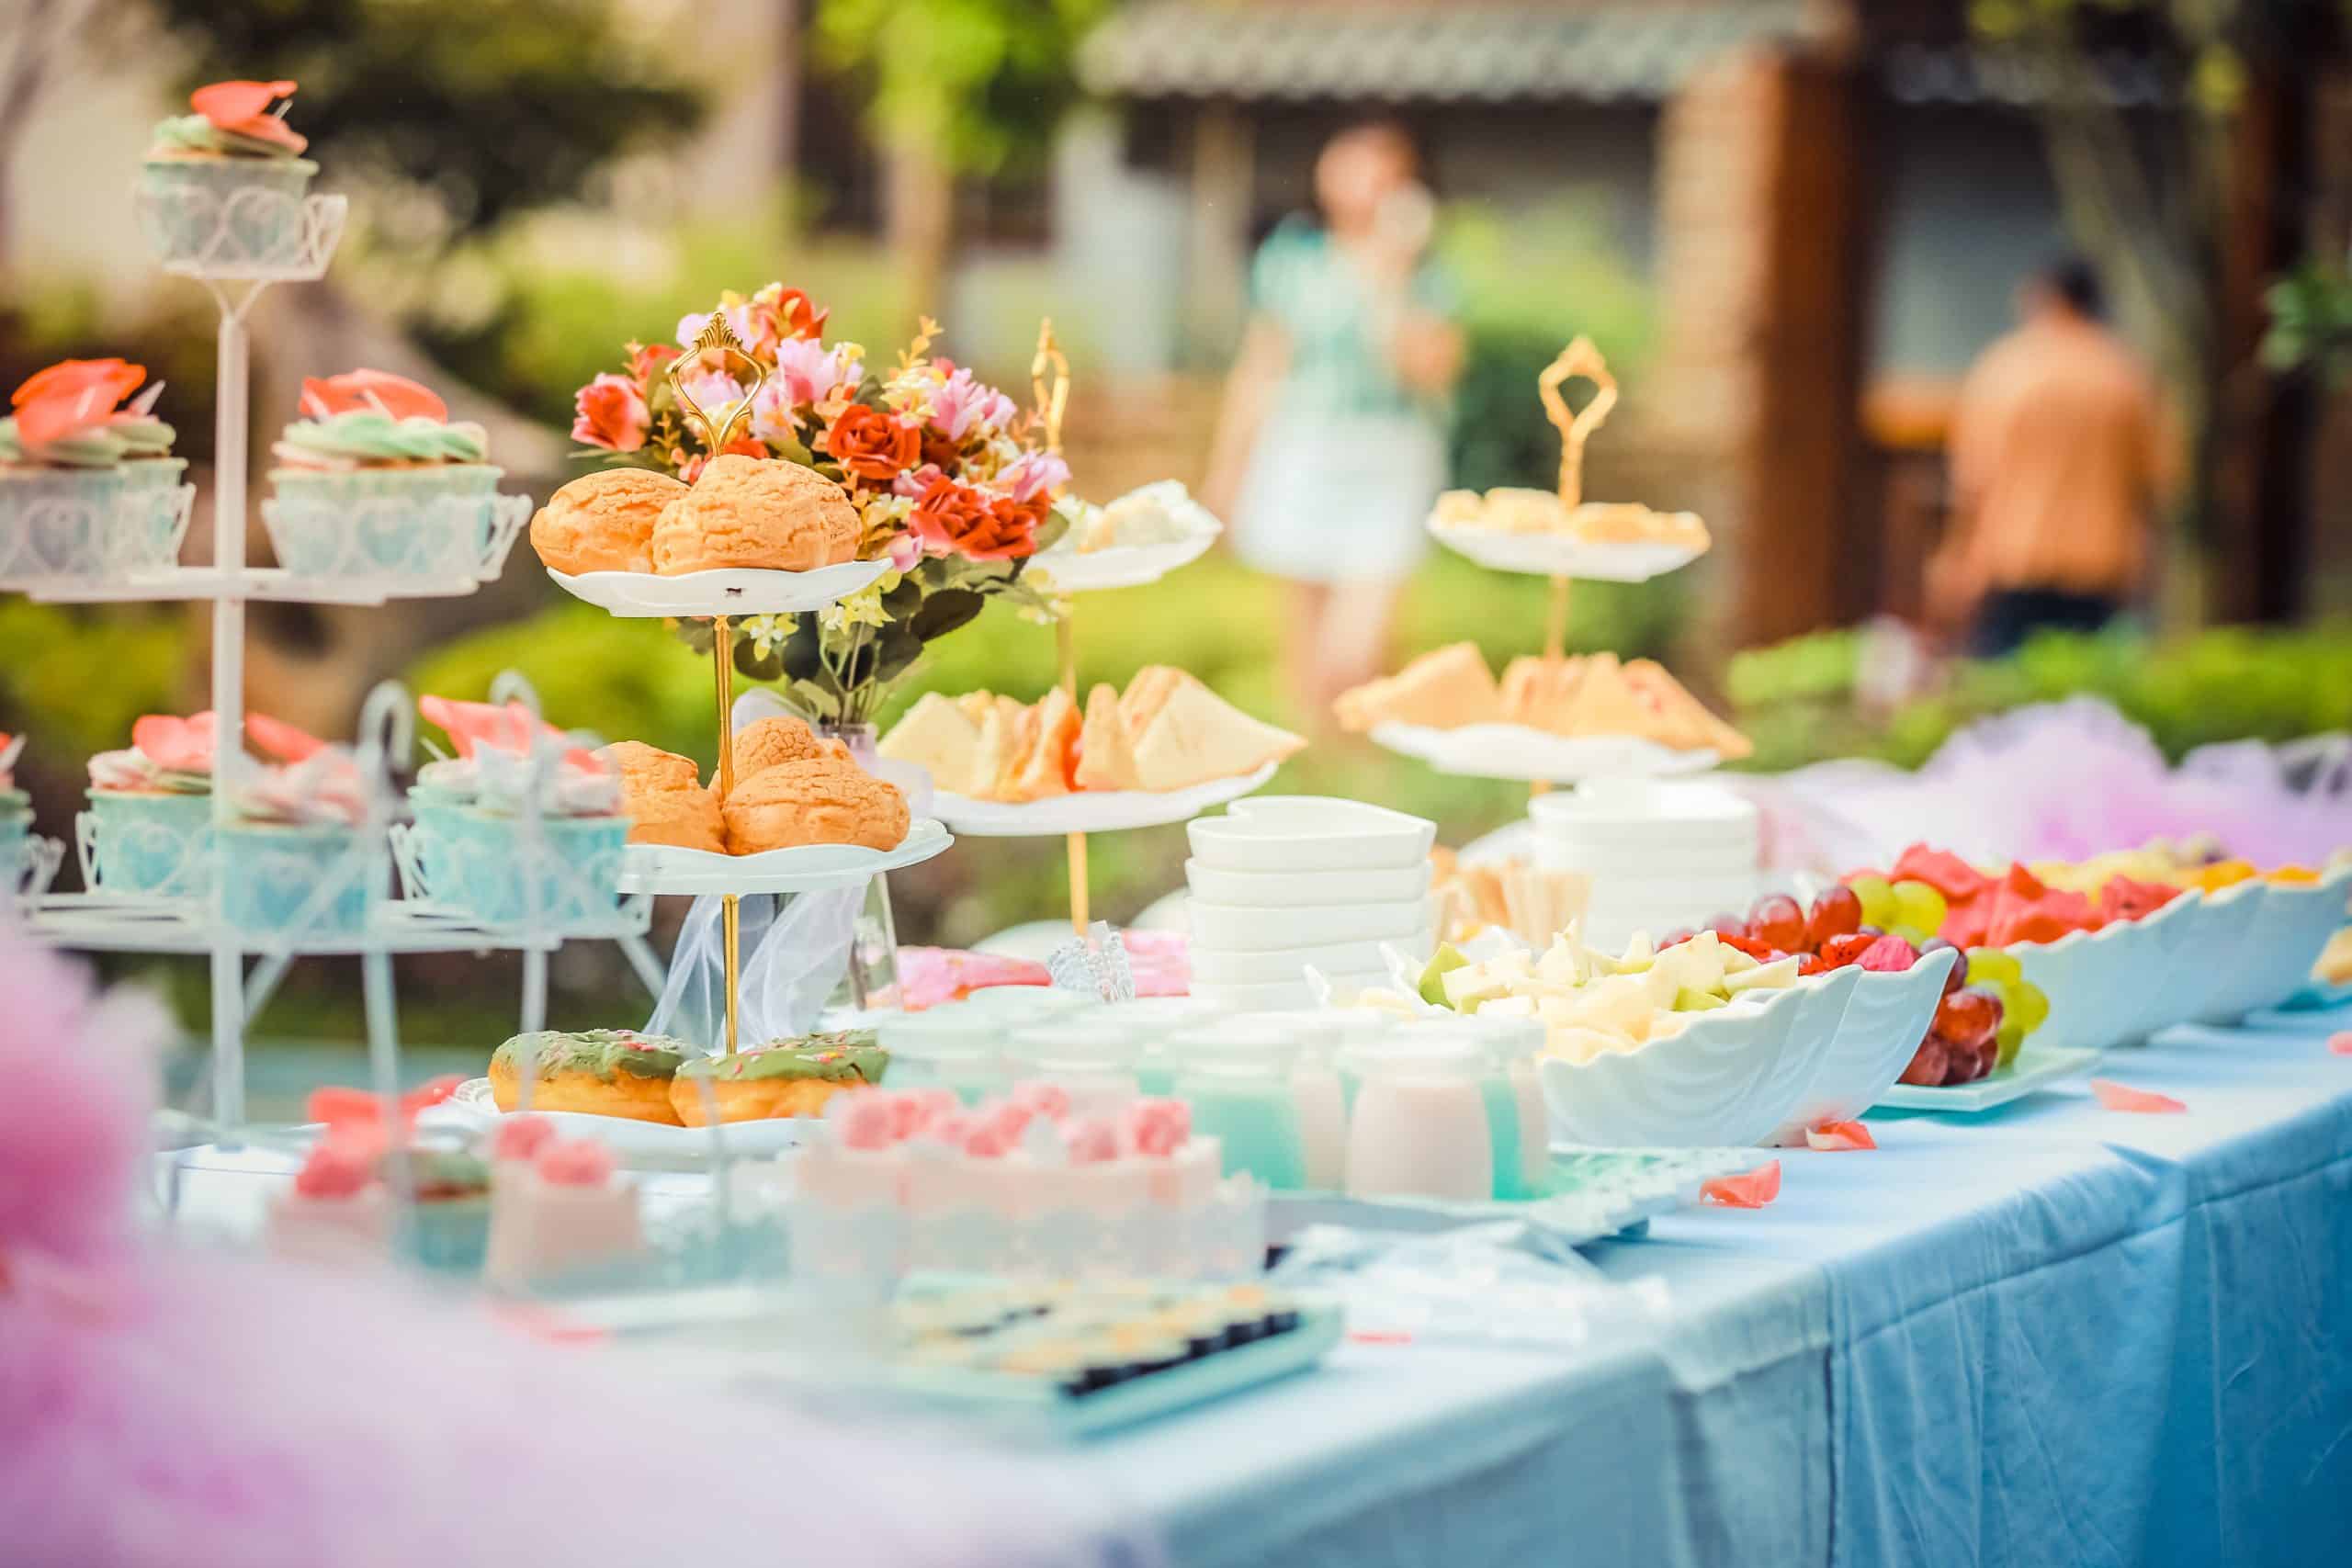 Here are the tips to find affordable wedding catering in Minneapolis